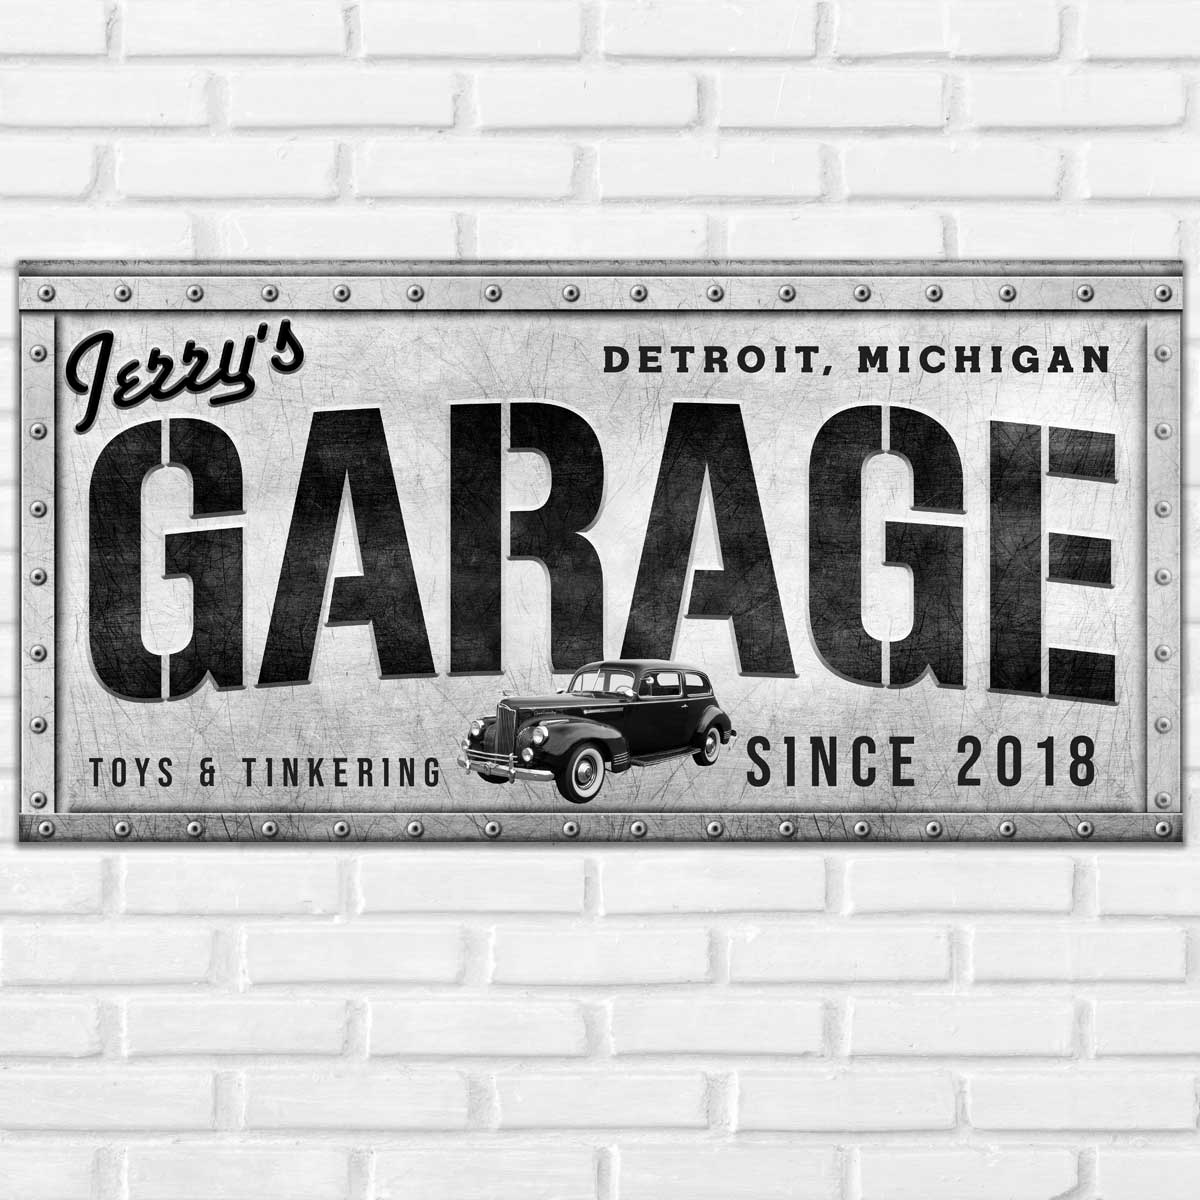 garage sign or Man cave sign is made of metal with rivets and the words, Jerry garage, city and state, toys and tinkering, with est. date.